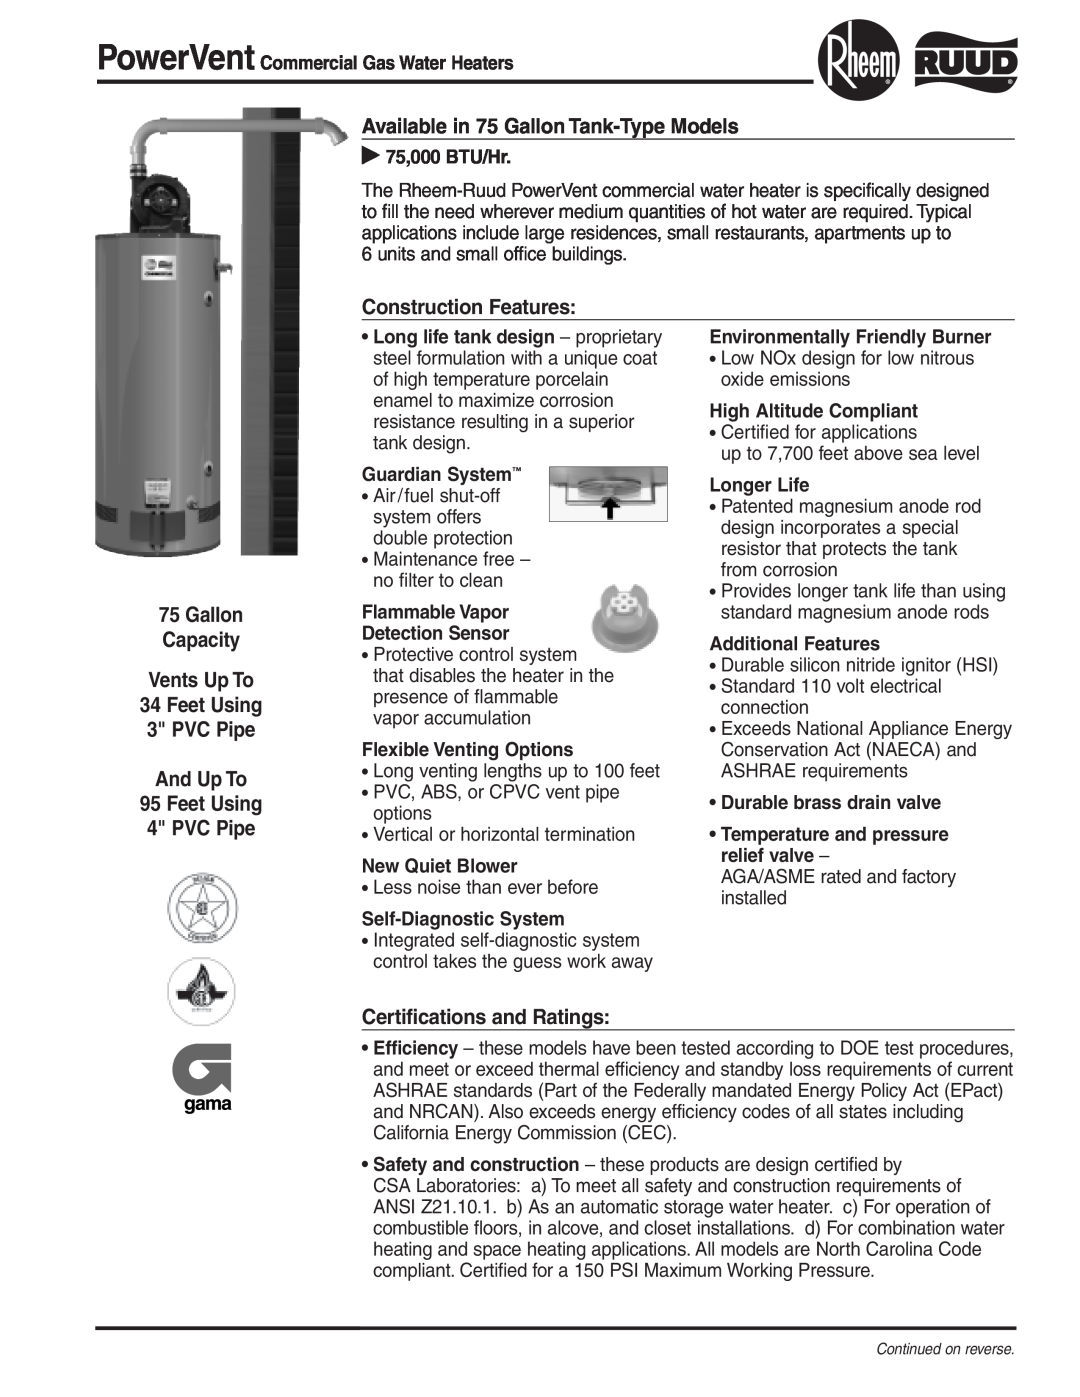 Rheem Commercial Gas Water Heater manual Available in 75 GallonTank-Type Models, Construction Features 